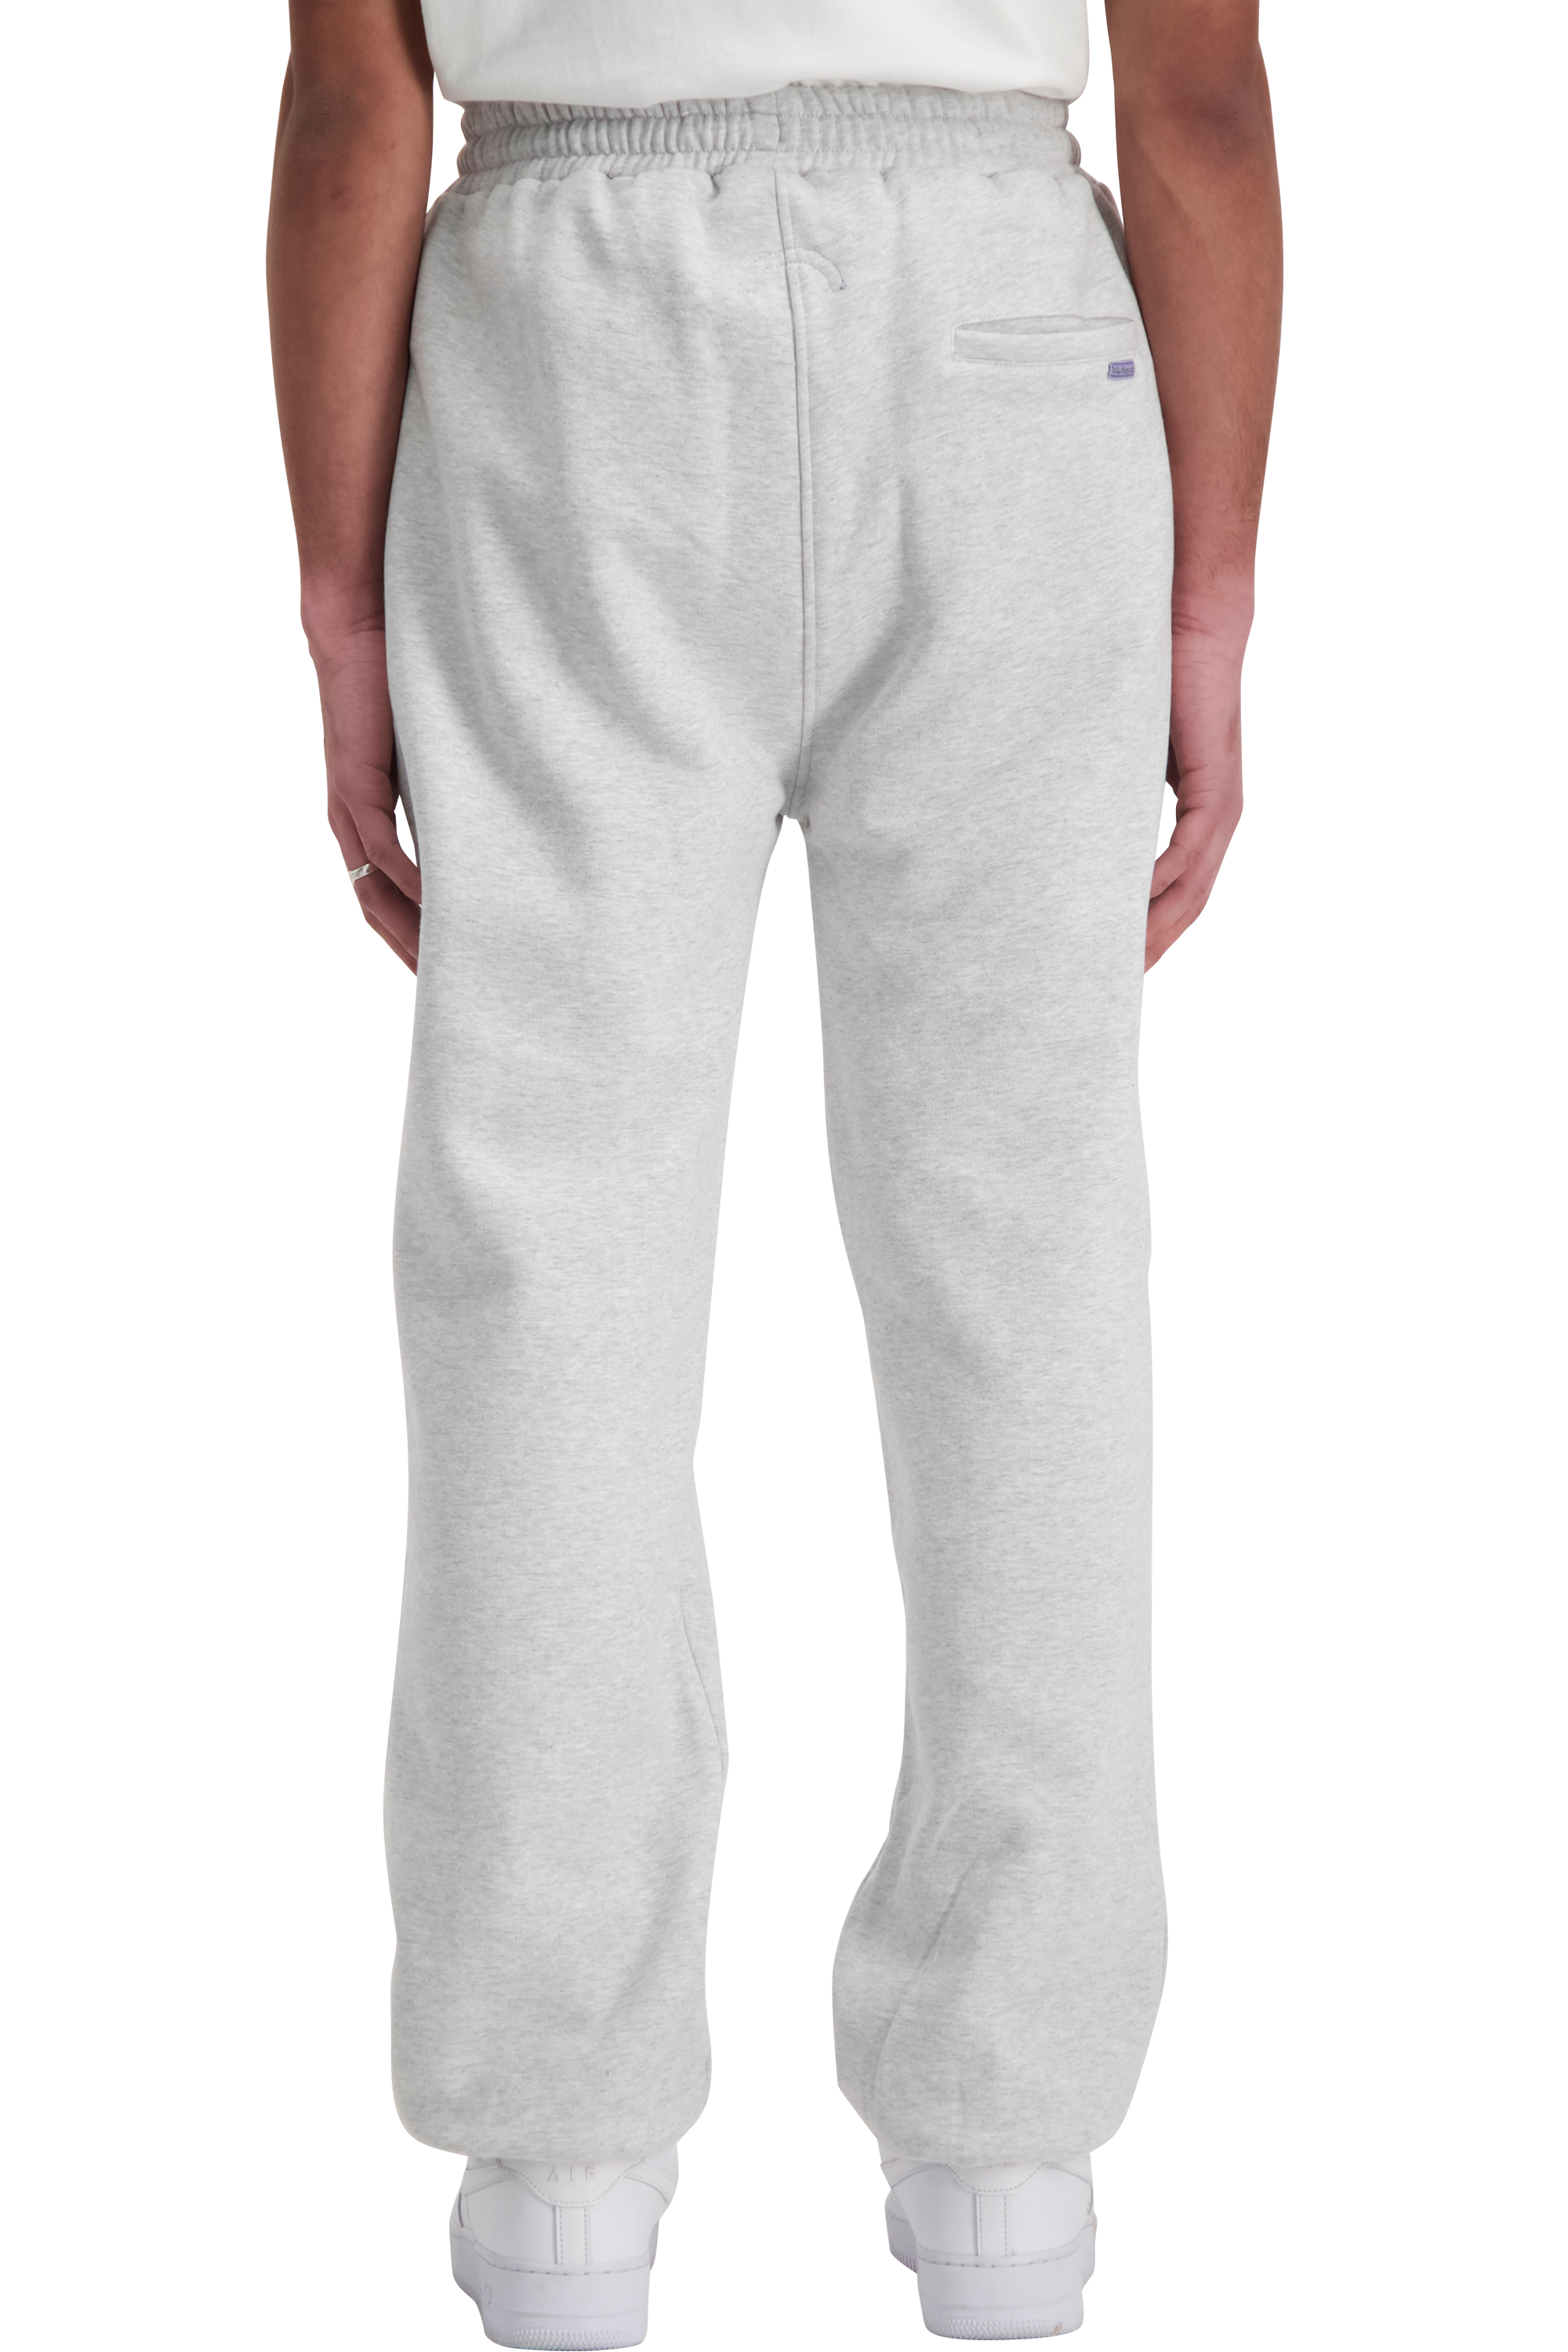 products-catnajogger-grey_legs_tiff_3-png